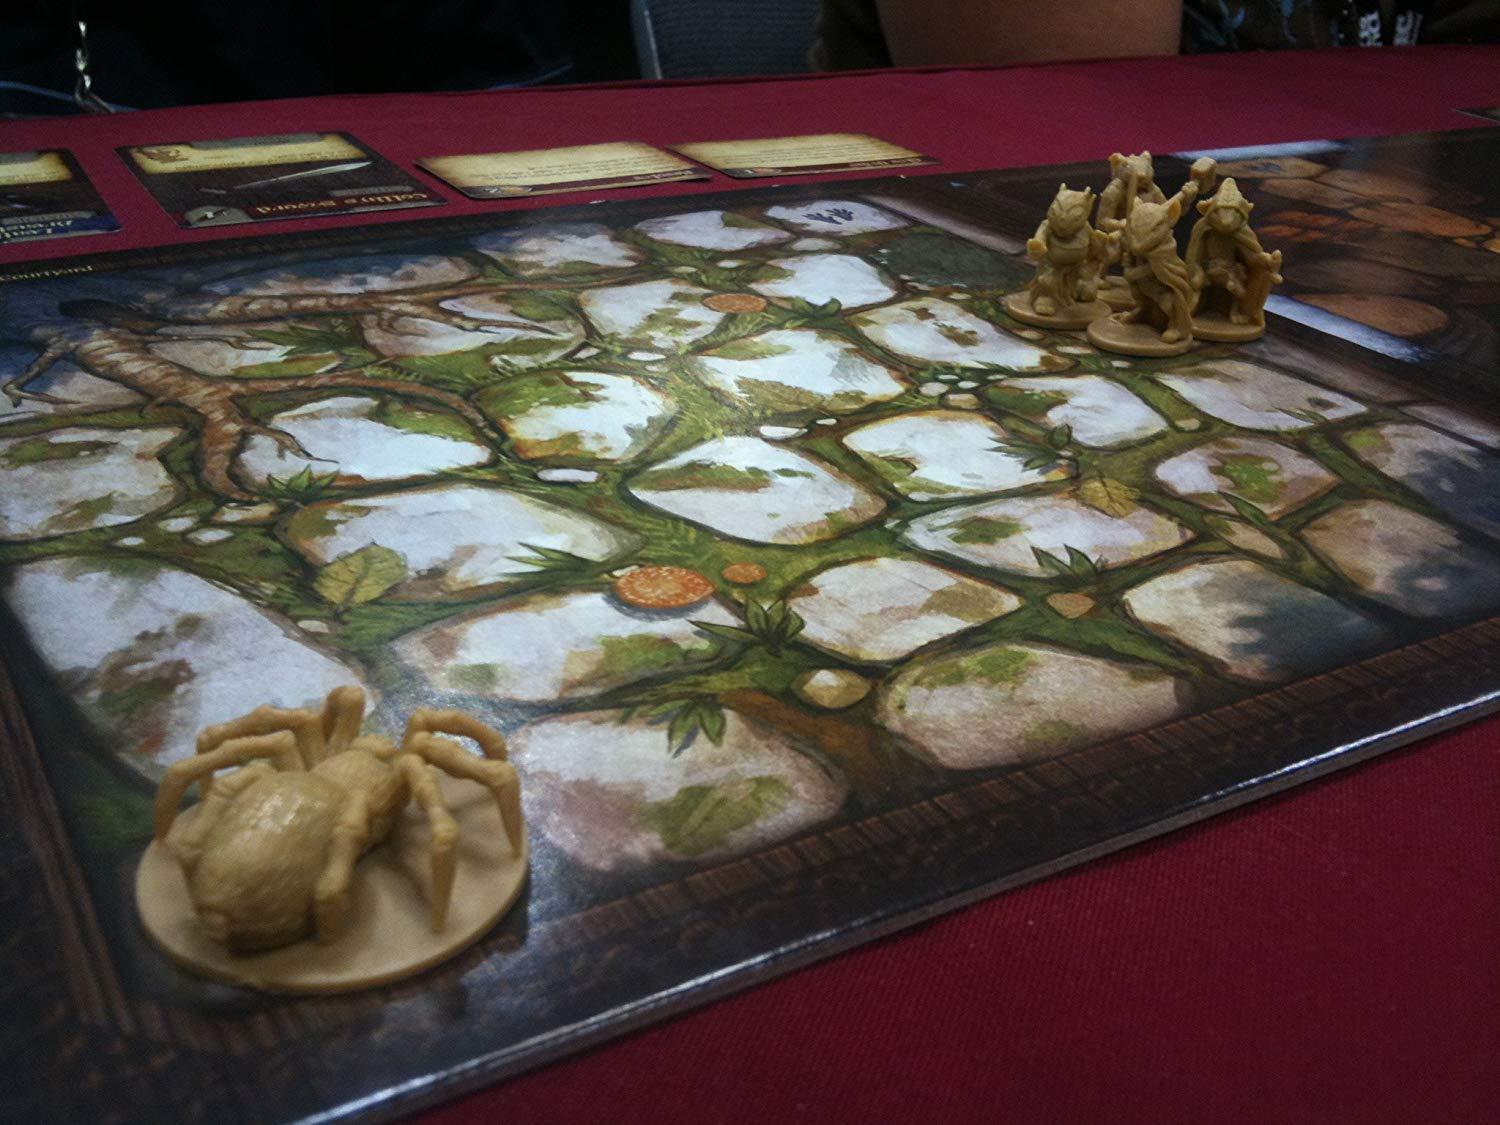 Mice and Mystics Board Games Plaid Hat Games    | Red Claw Gaming